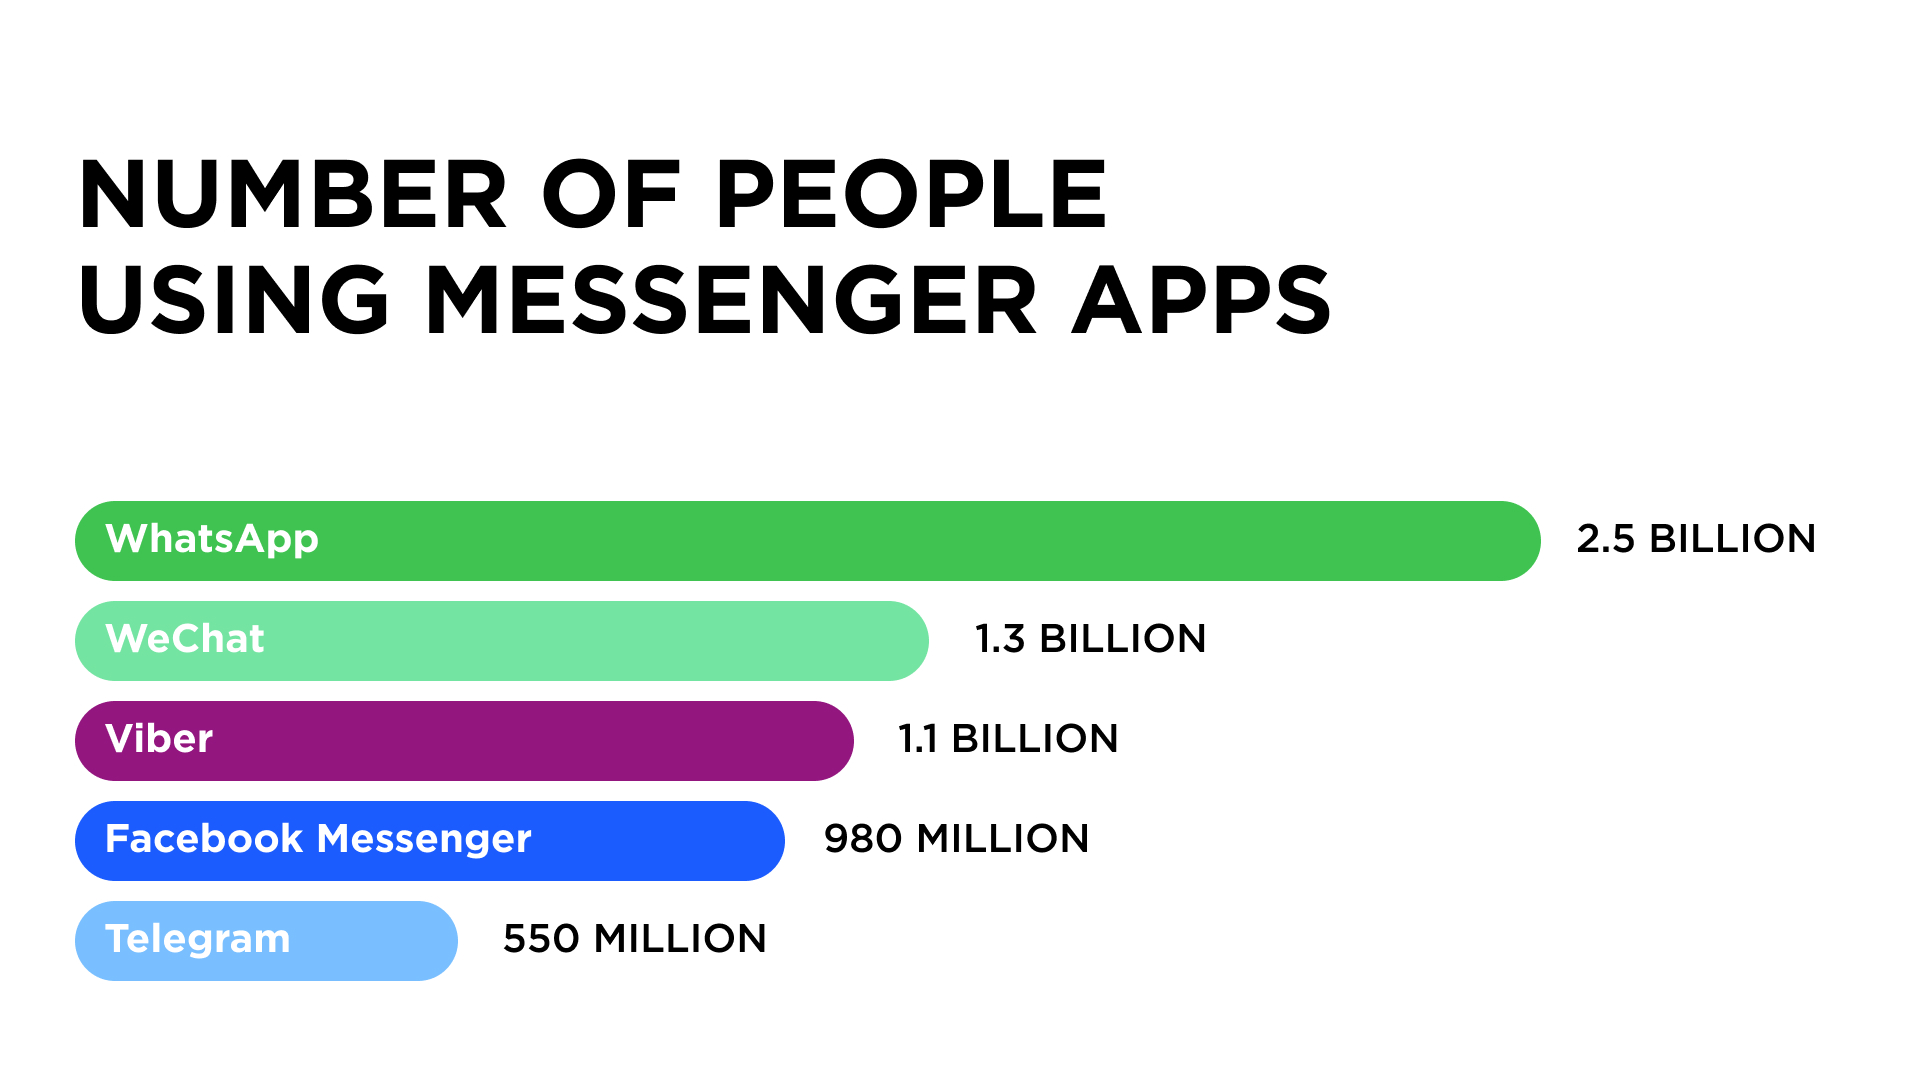 Number of people using messenger apps across the world